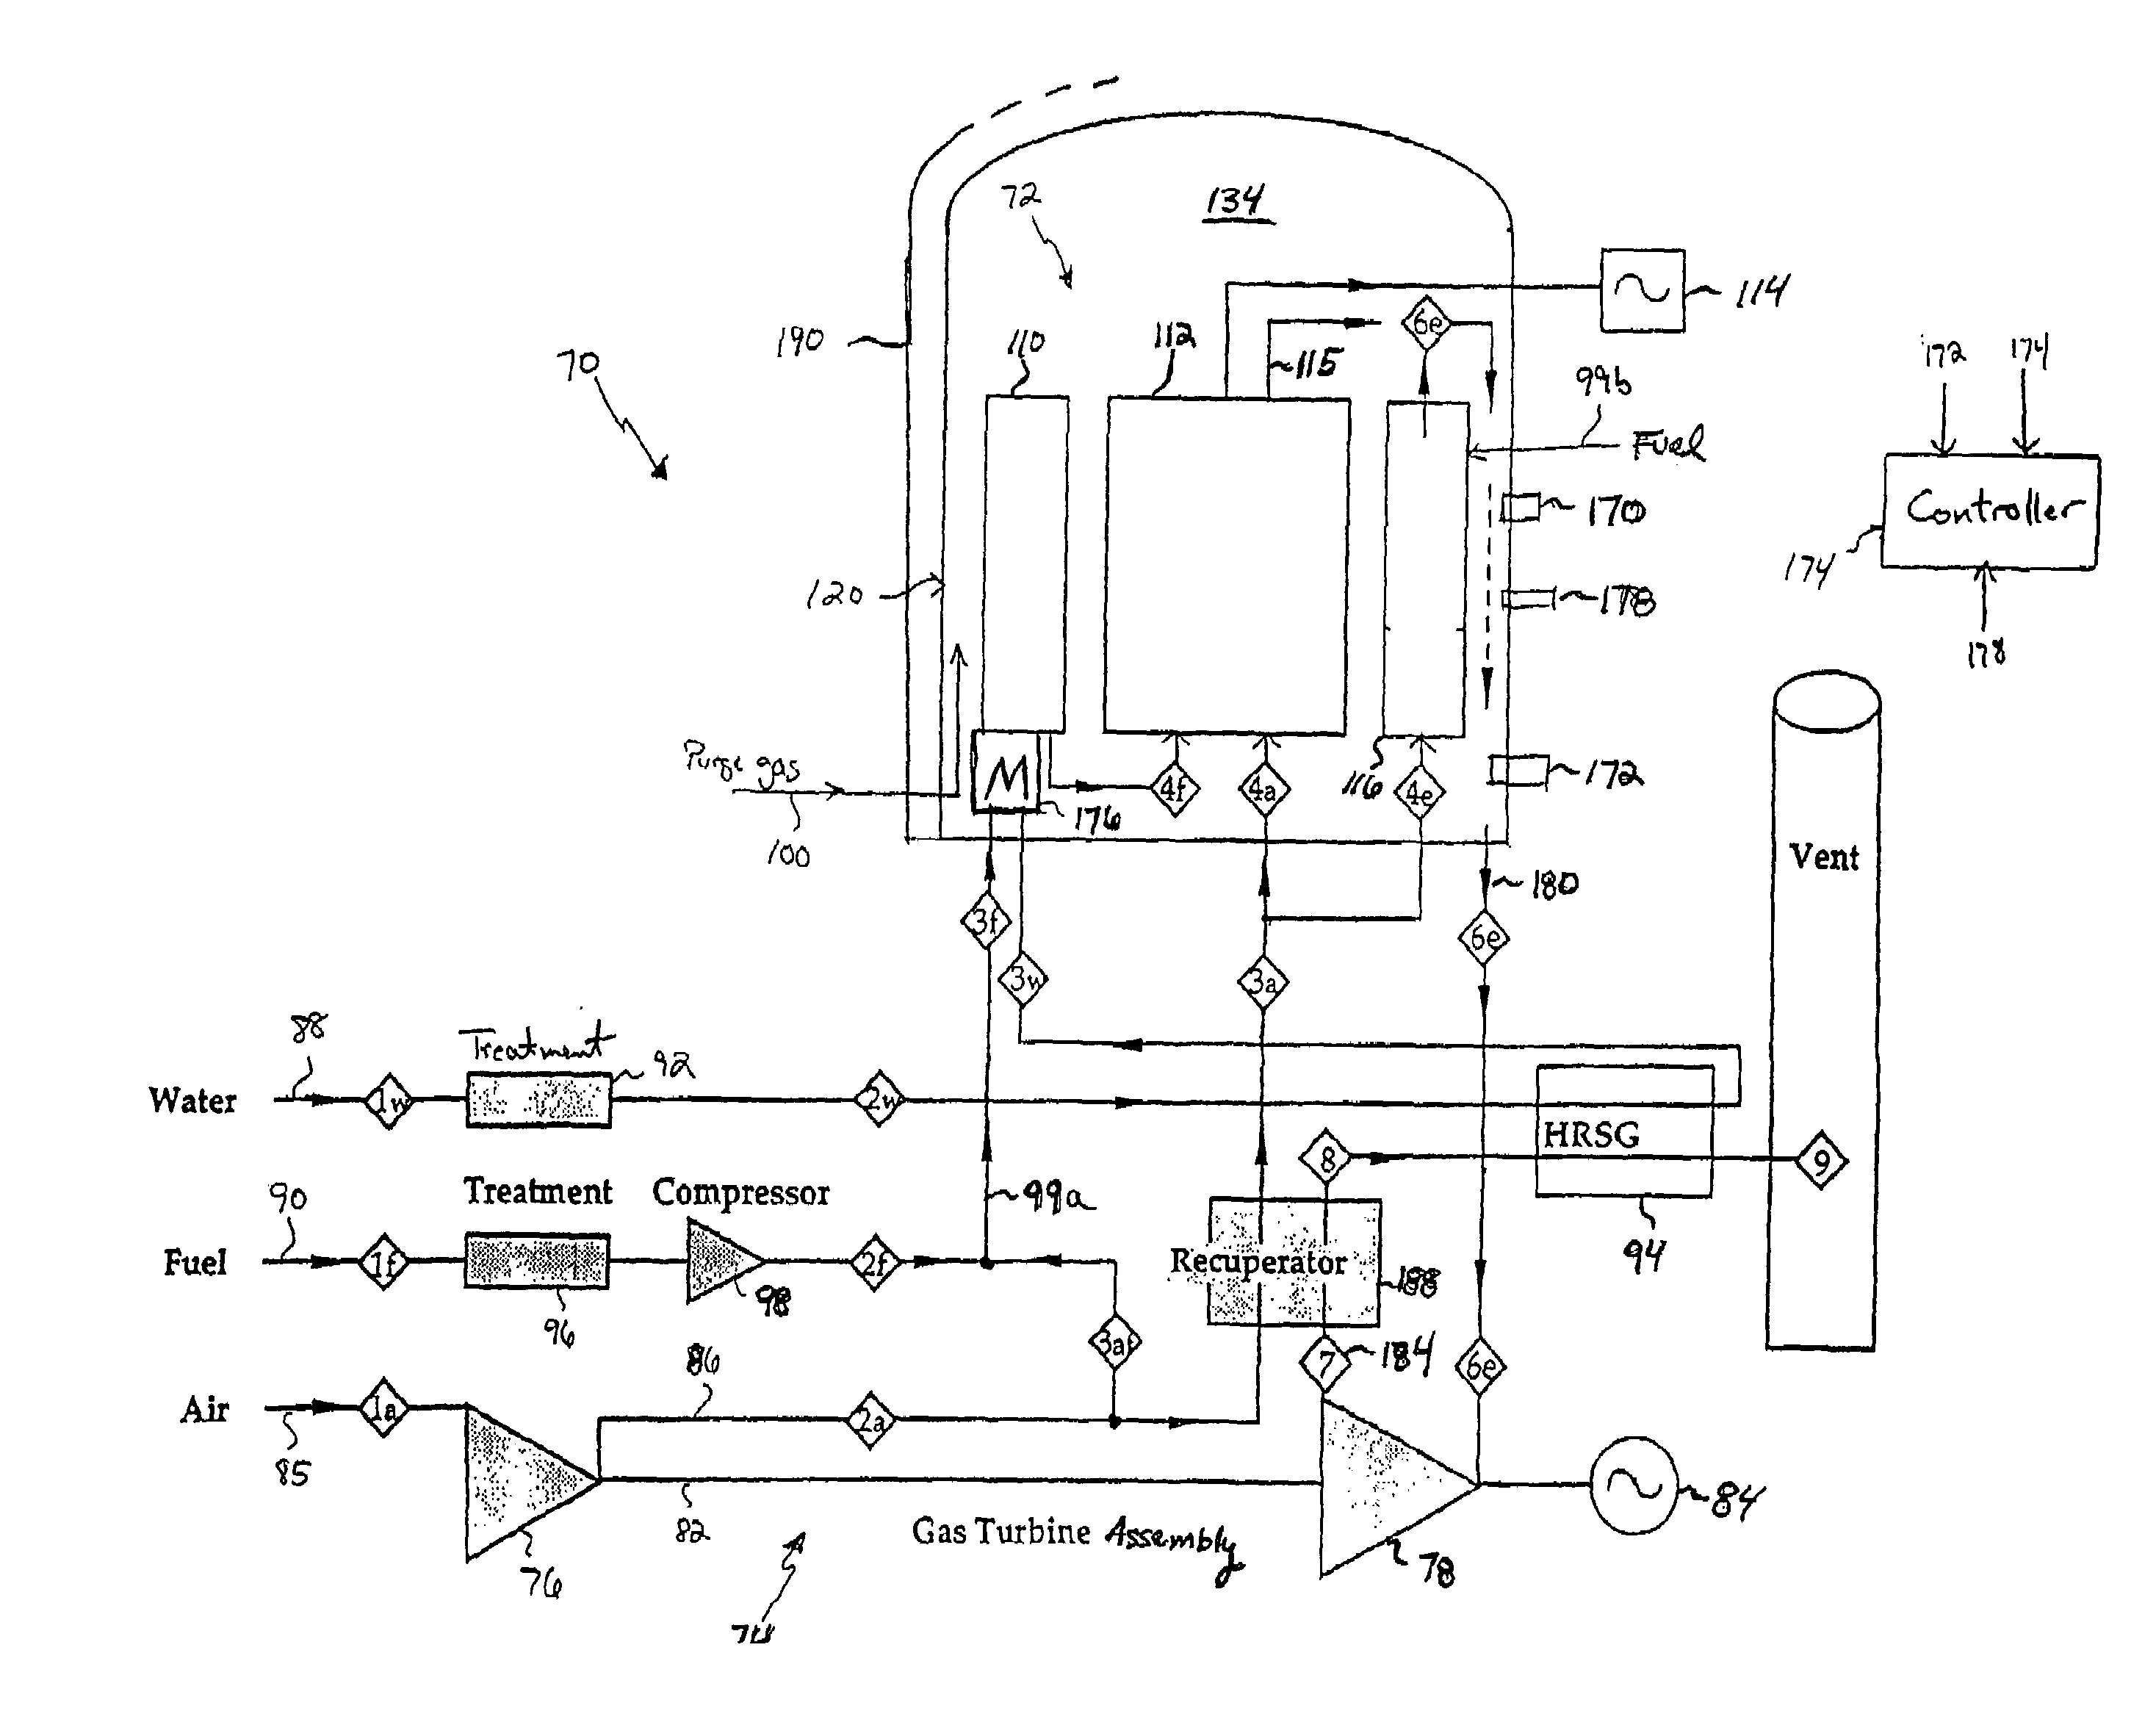 Multi-function energy system operable as a fuel cell, reformer, or thermal plant